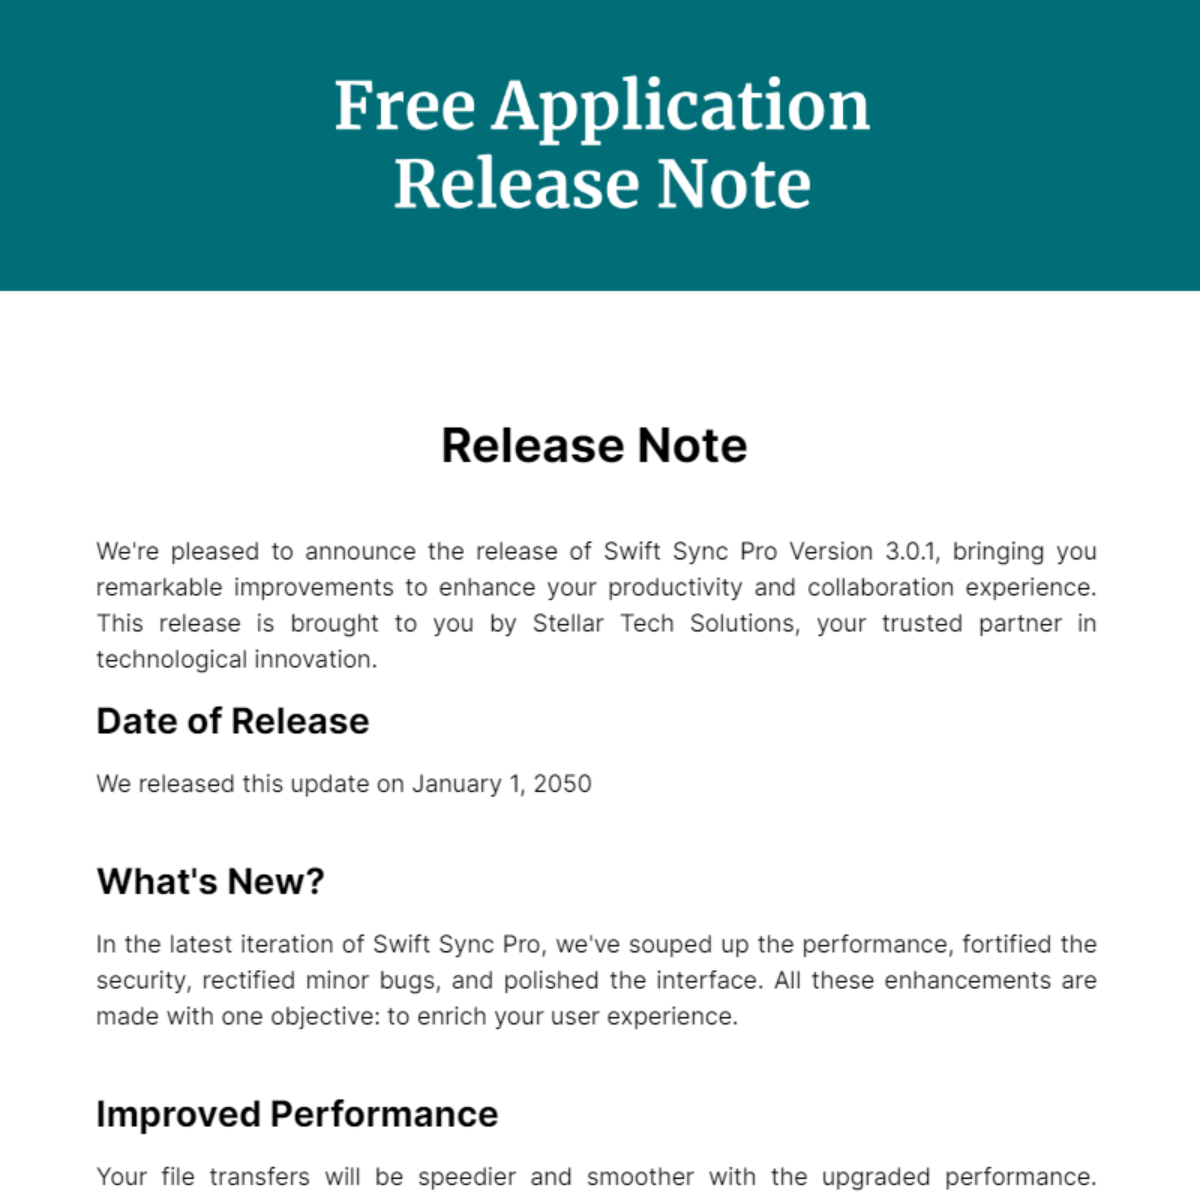 Application Release Note Template